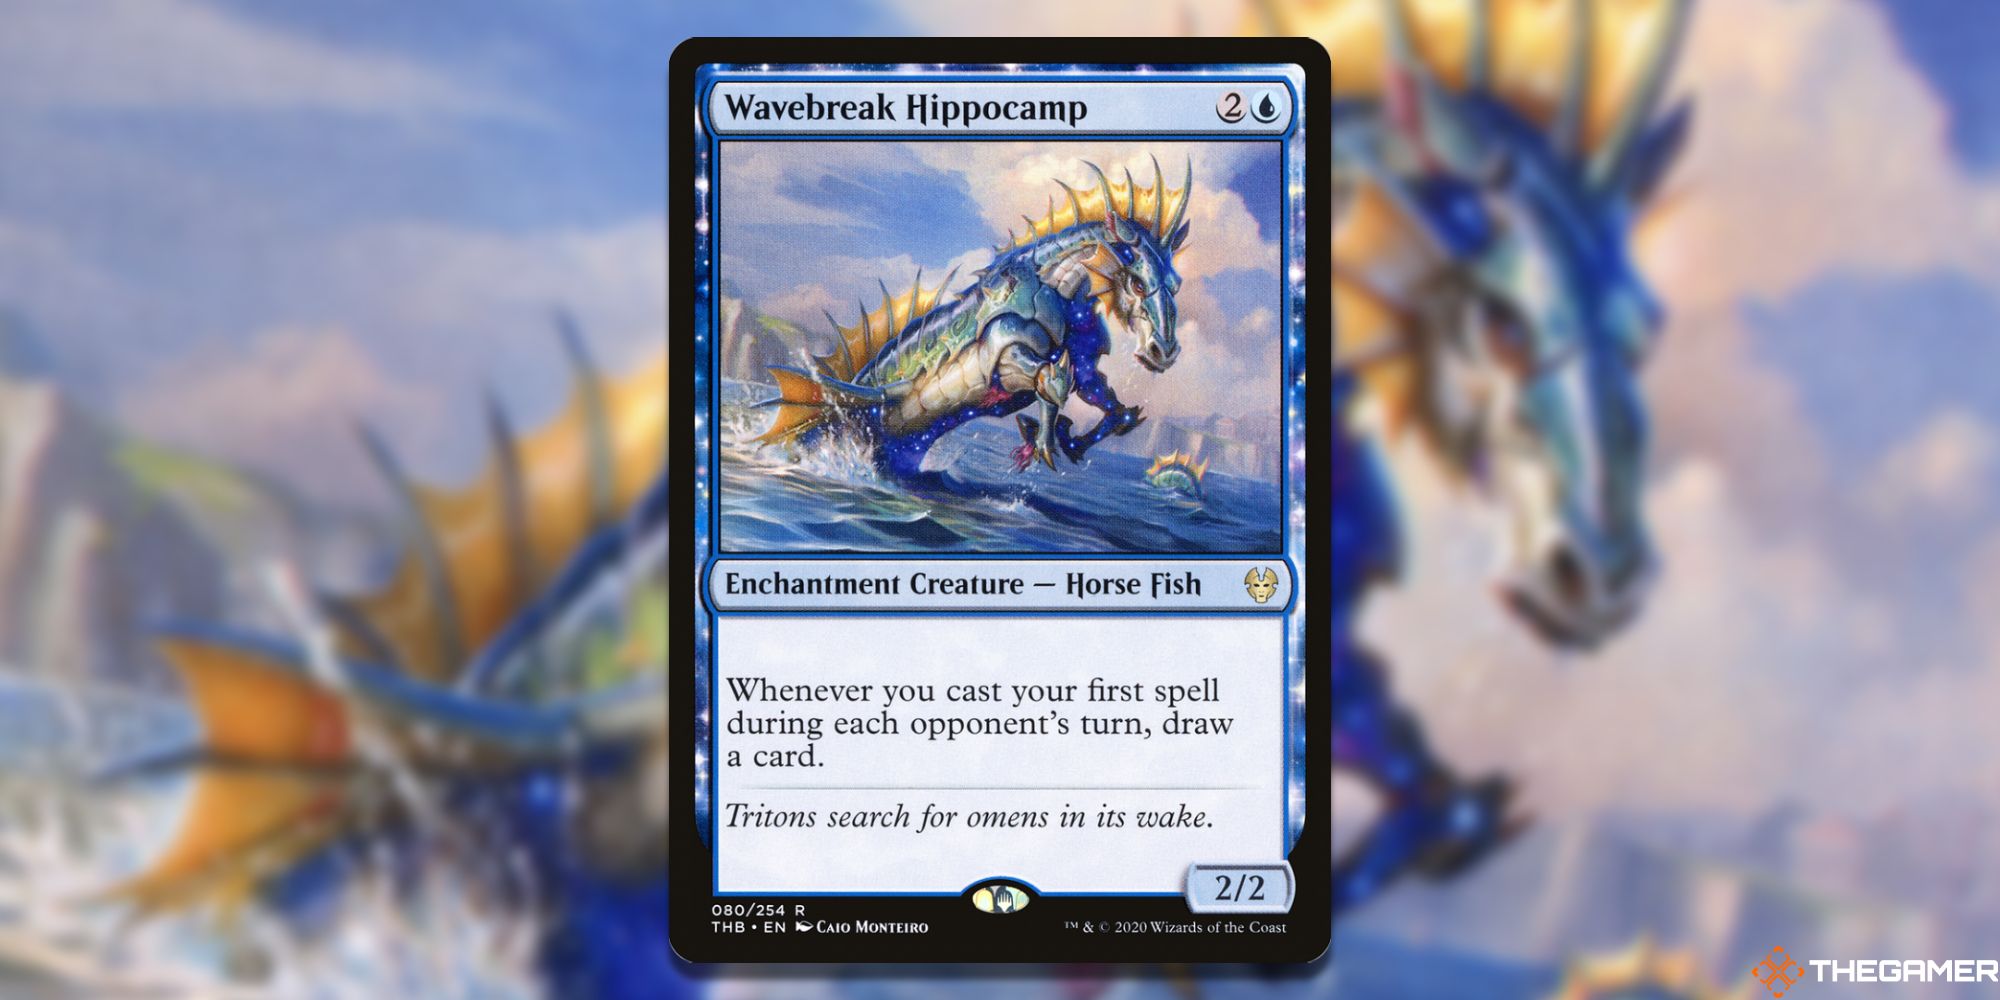     Image of the Wavebreak Hippocamp card in Magic: The Gathering, with artwork by Caio Monteiro